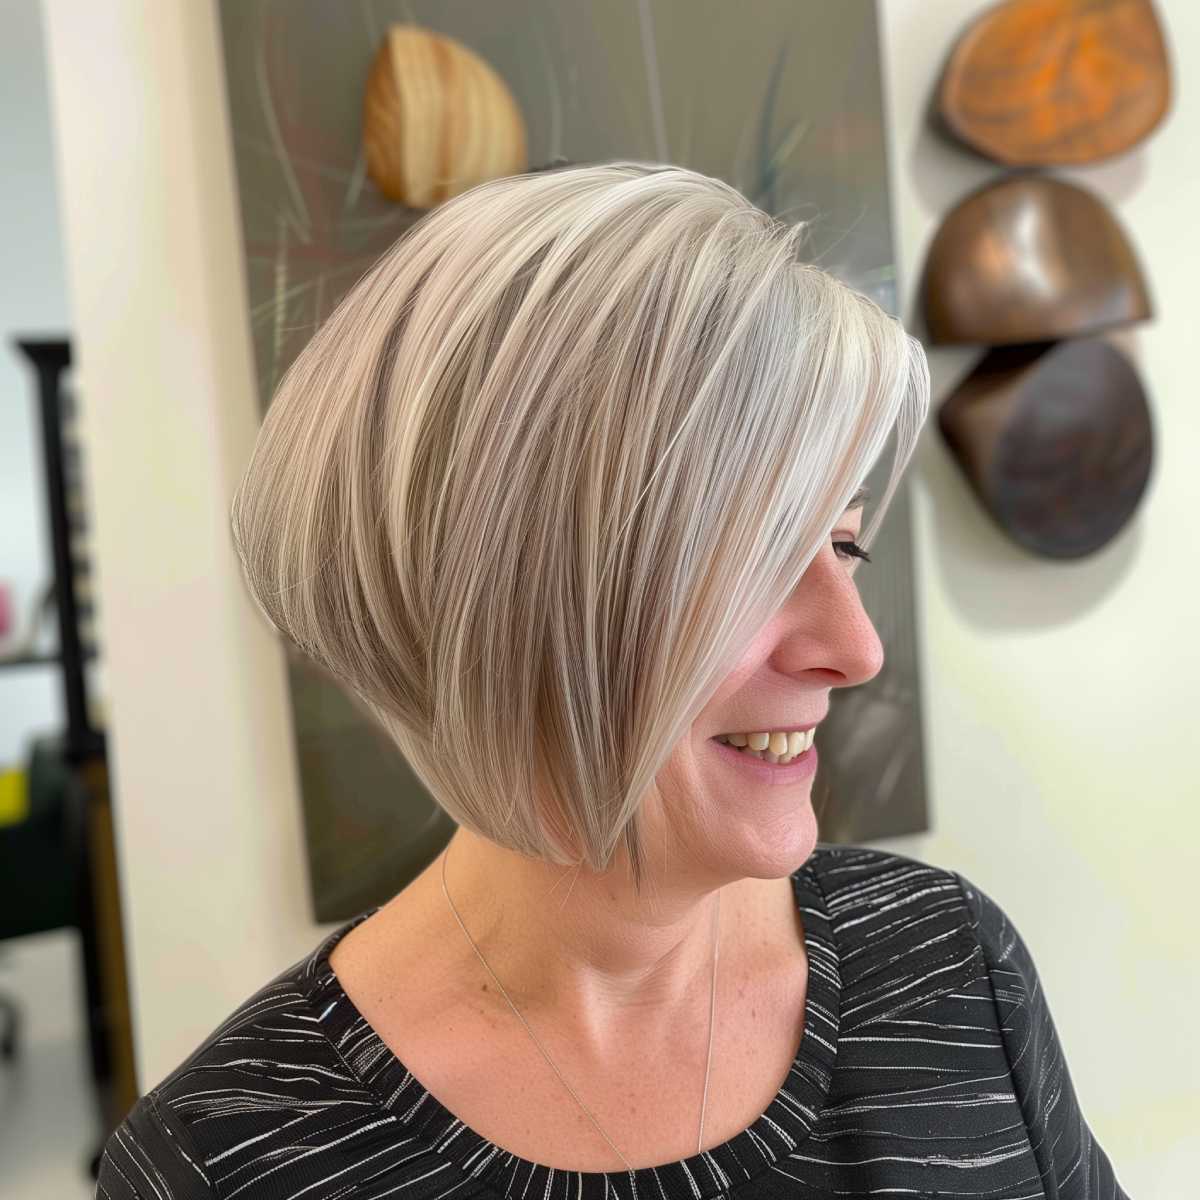 Side view of a woman with an asymmetrical bob hairstyle featuring a sleek, angled cut and platinum blonde color with subtle lowlights.